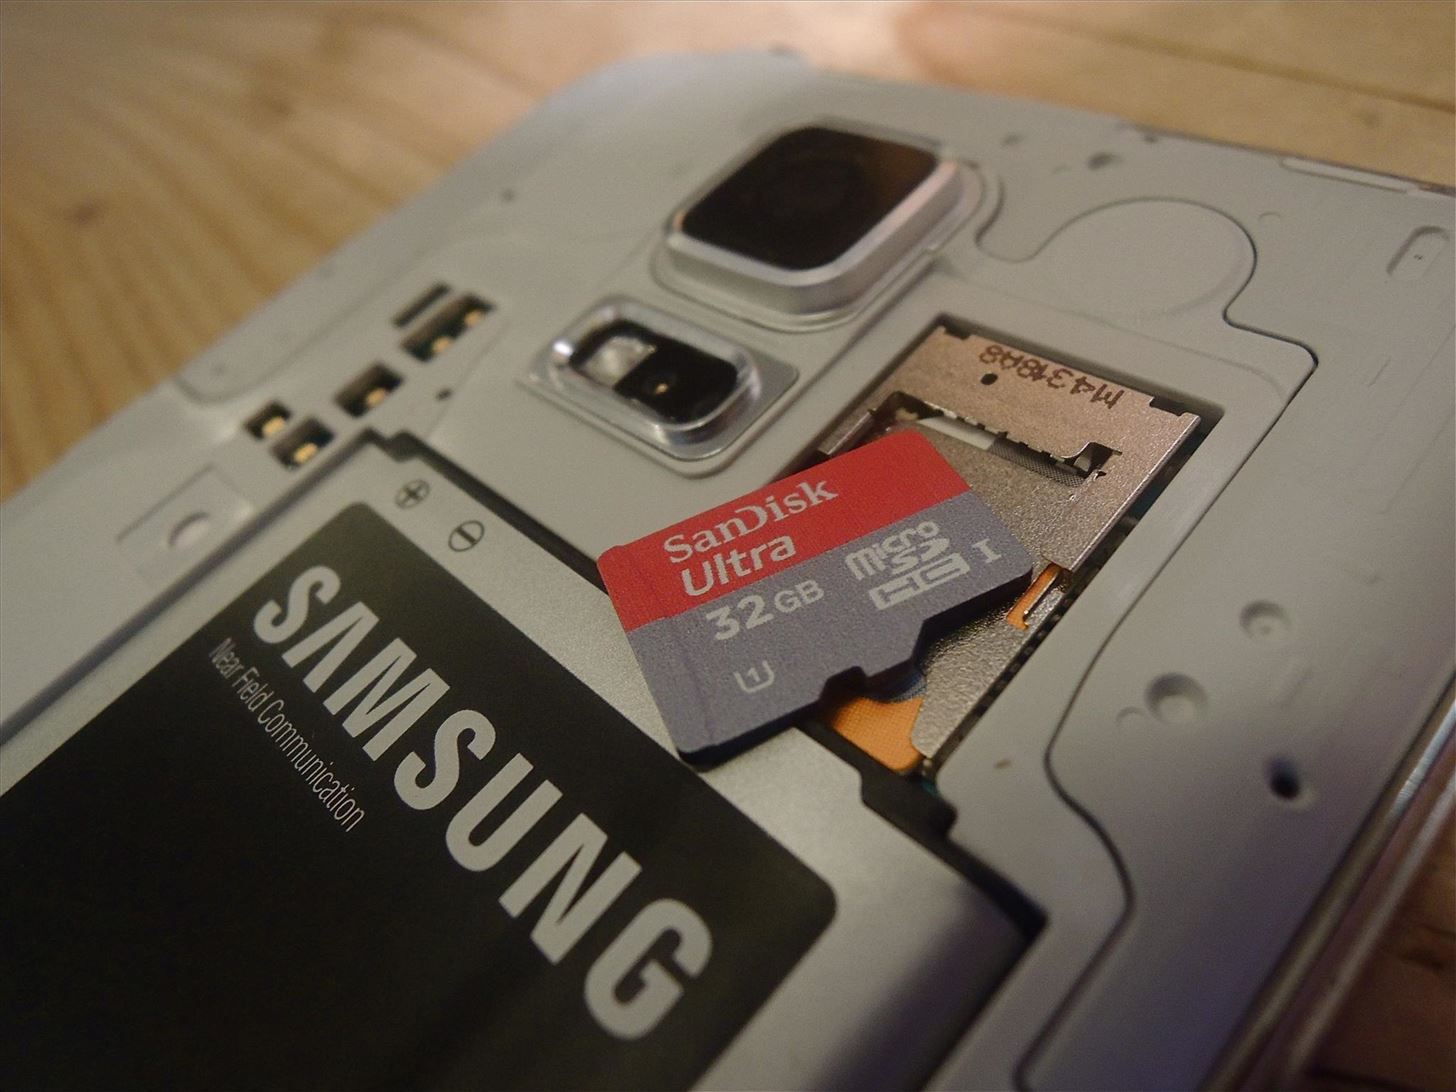 How To Store Pictures On A Galaxy S5 SD Card